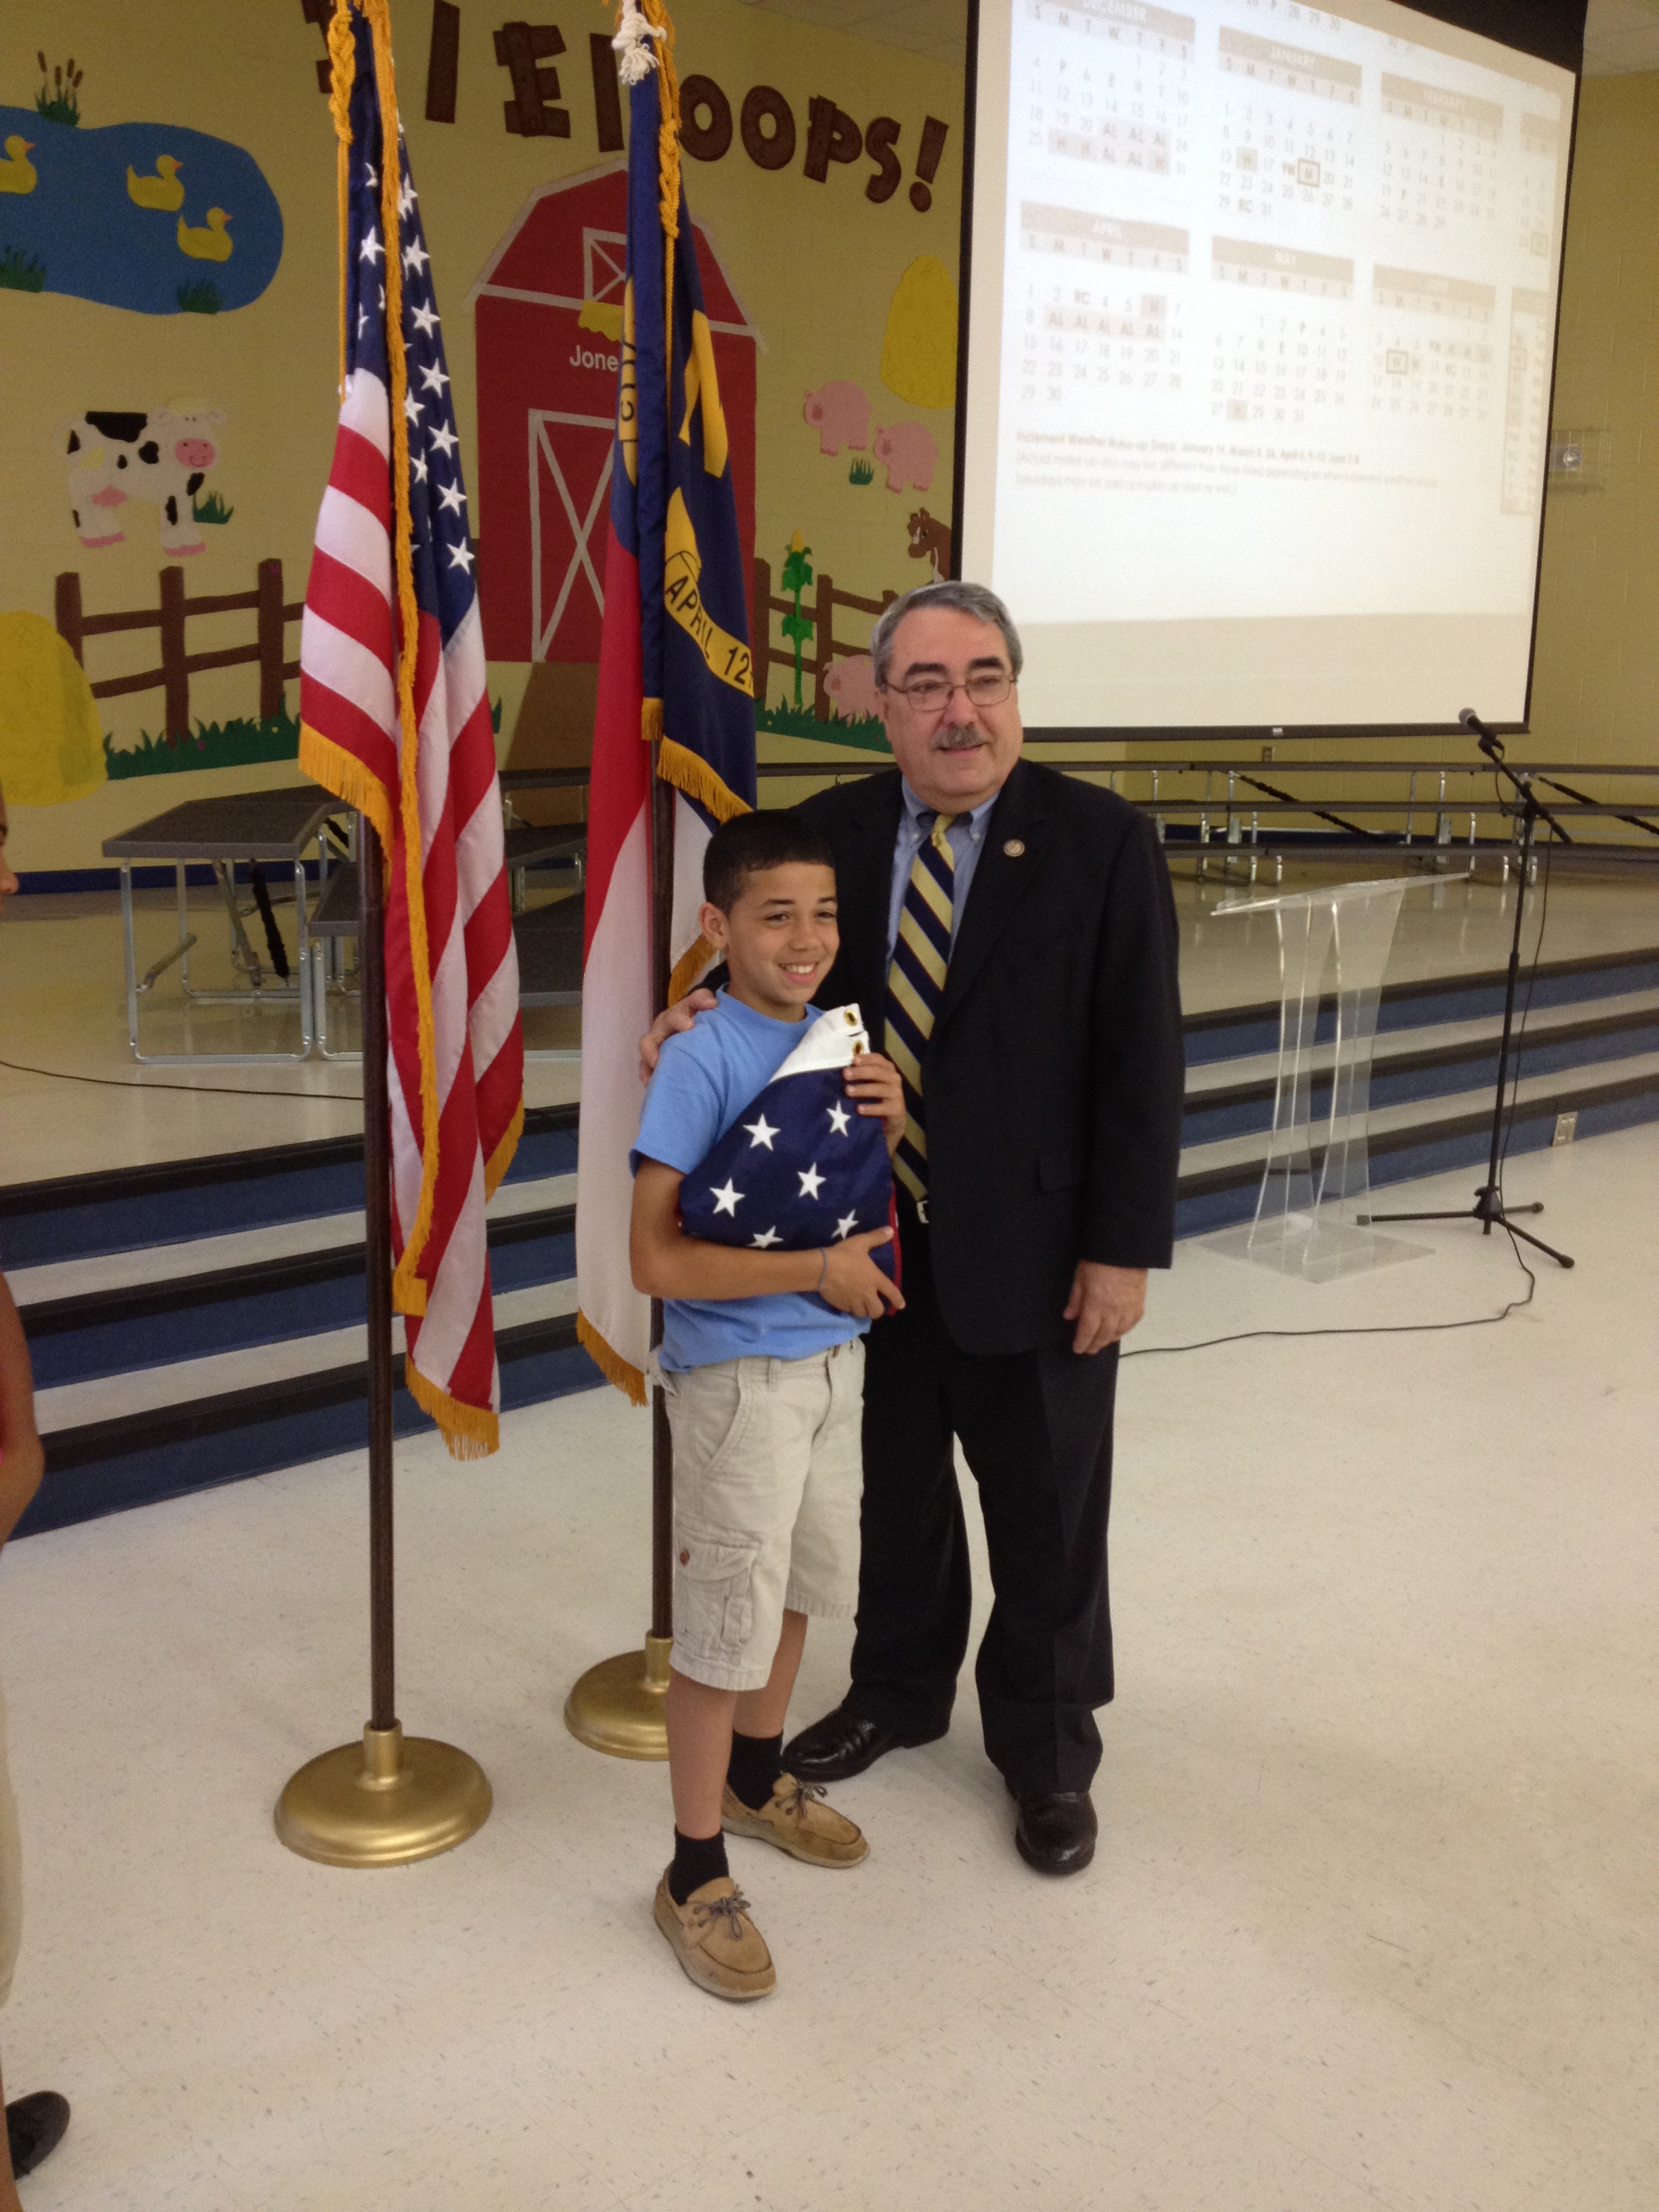 Congressman Butterfield presents a flag to a student at Jones Elementary in Wilson